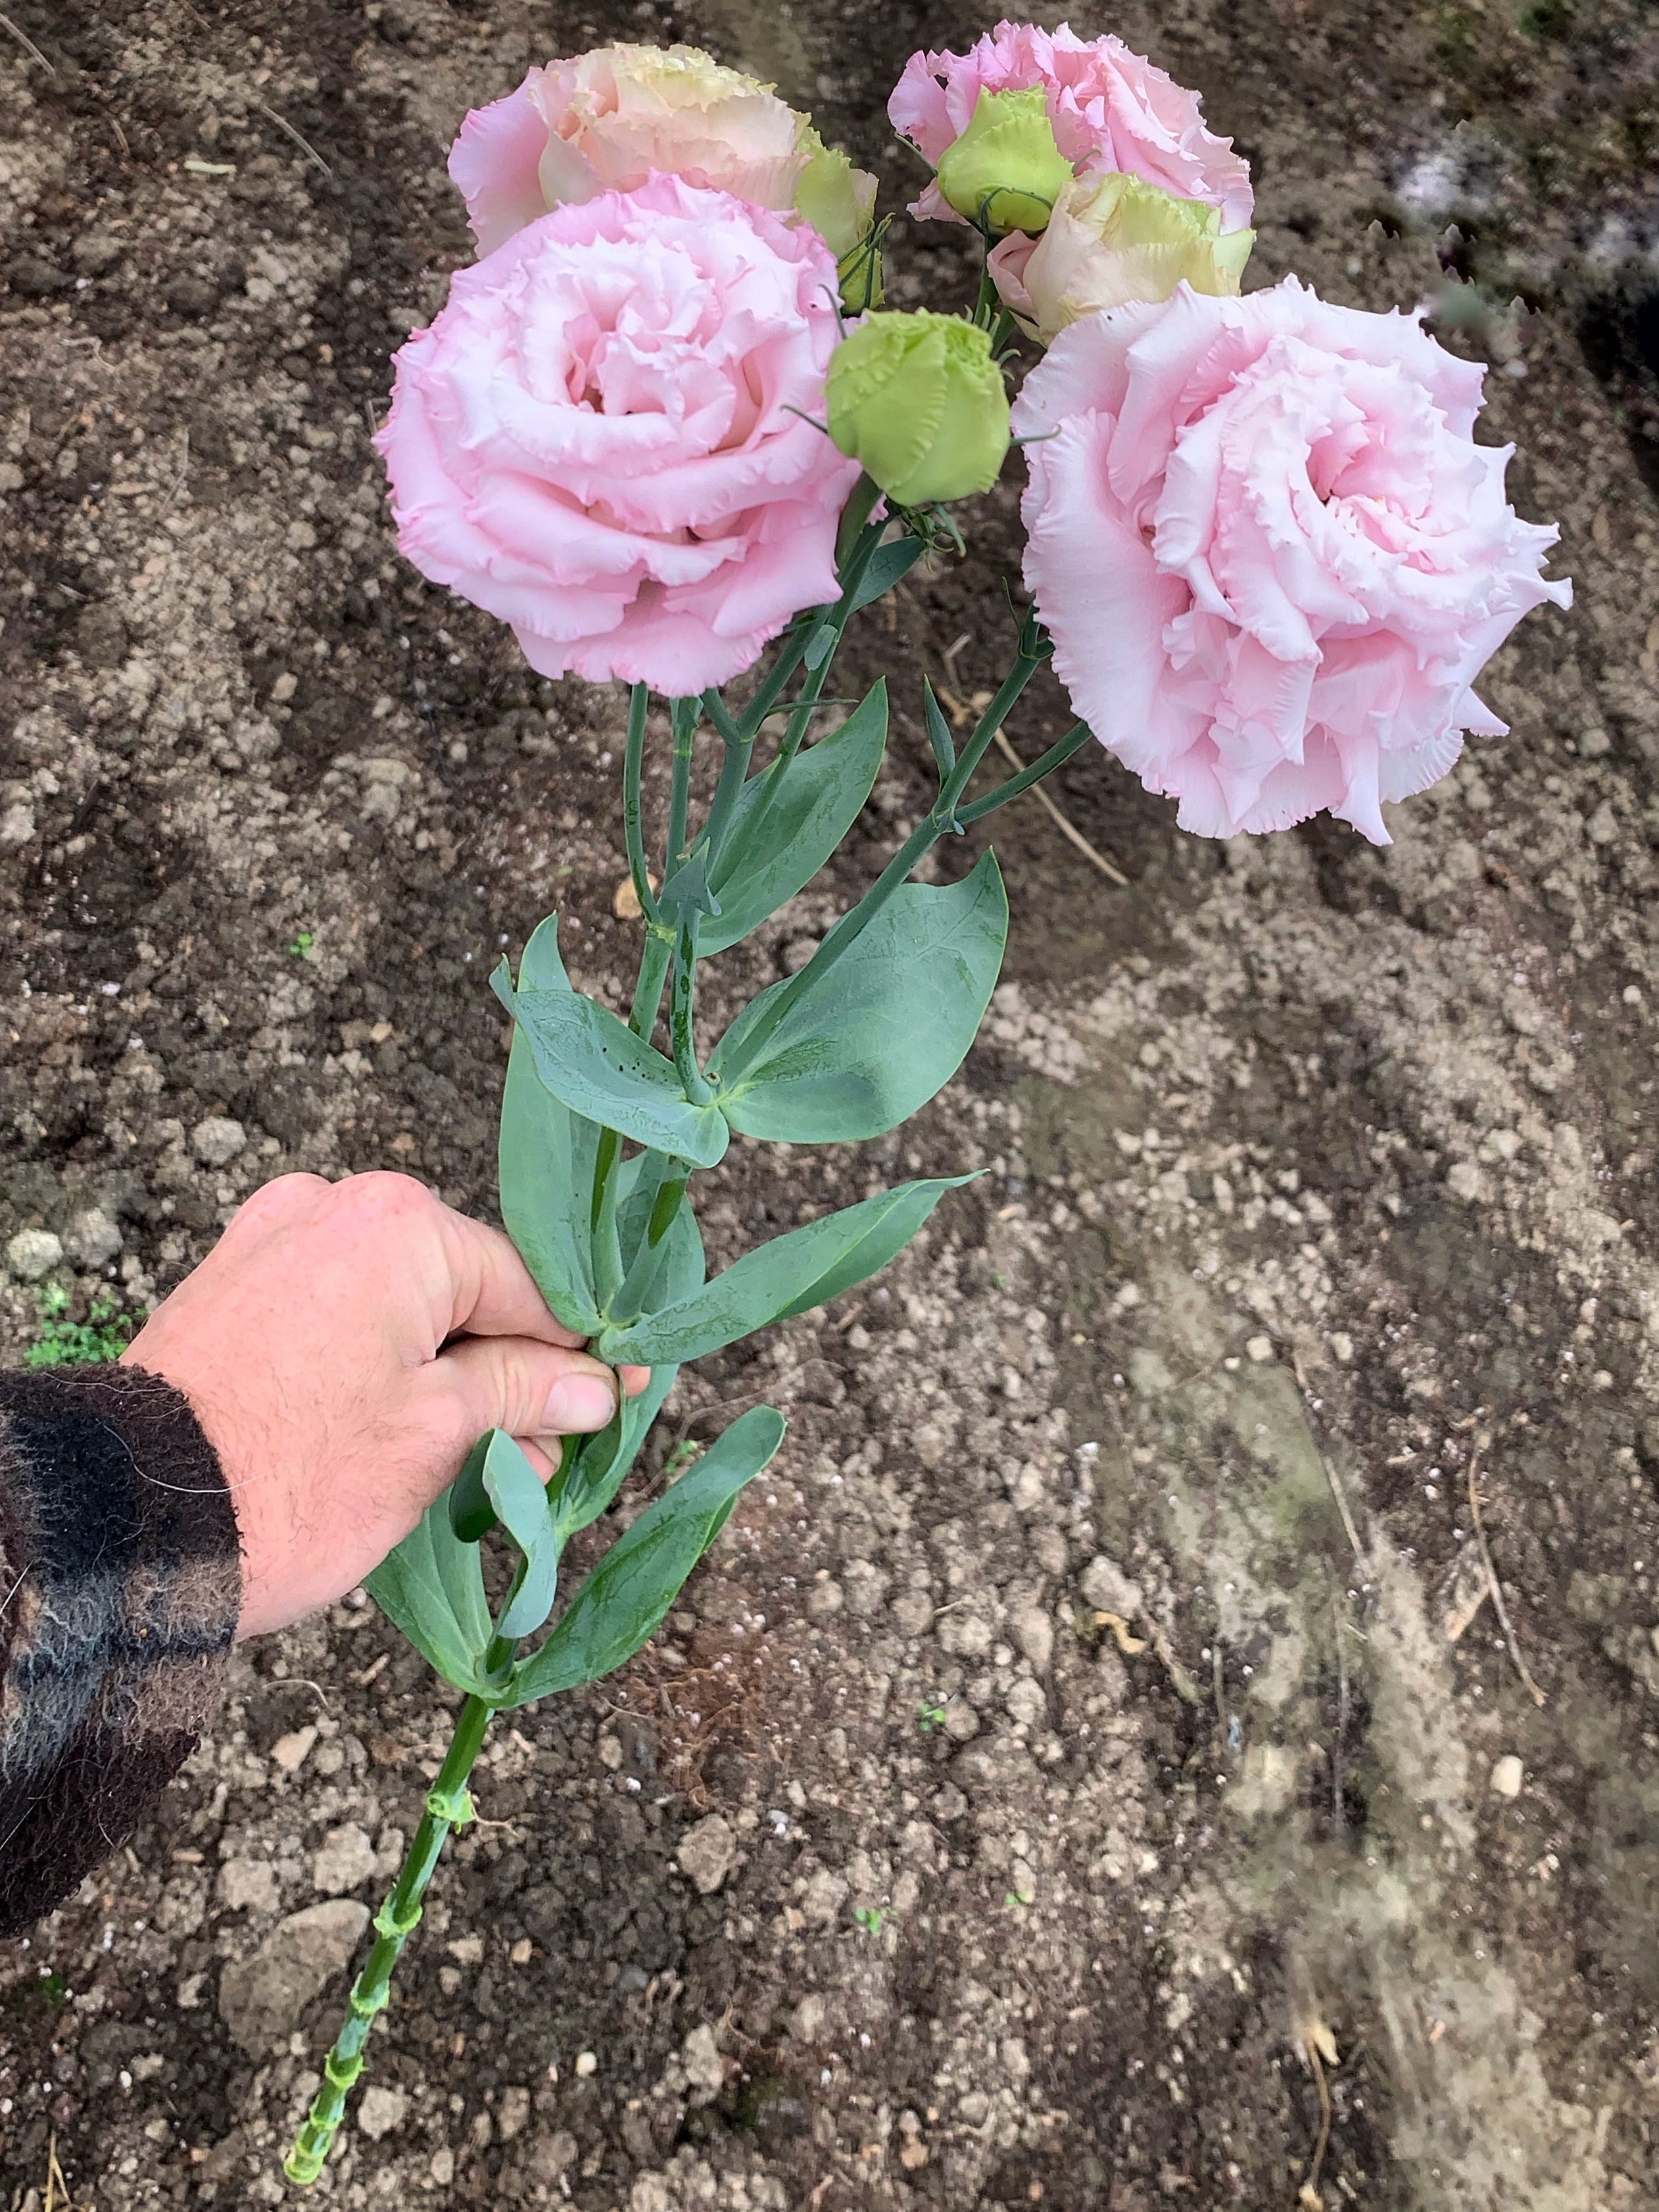 One stem of pale lavender Lisianthus, with four large ruffled, rose-shaped blooms. A pale hand is holding the stem over a dirt background.